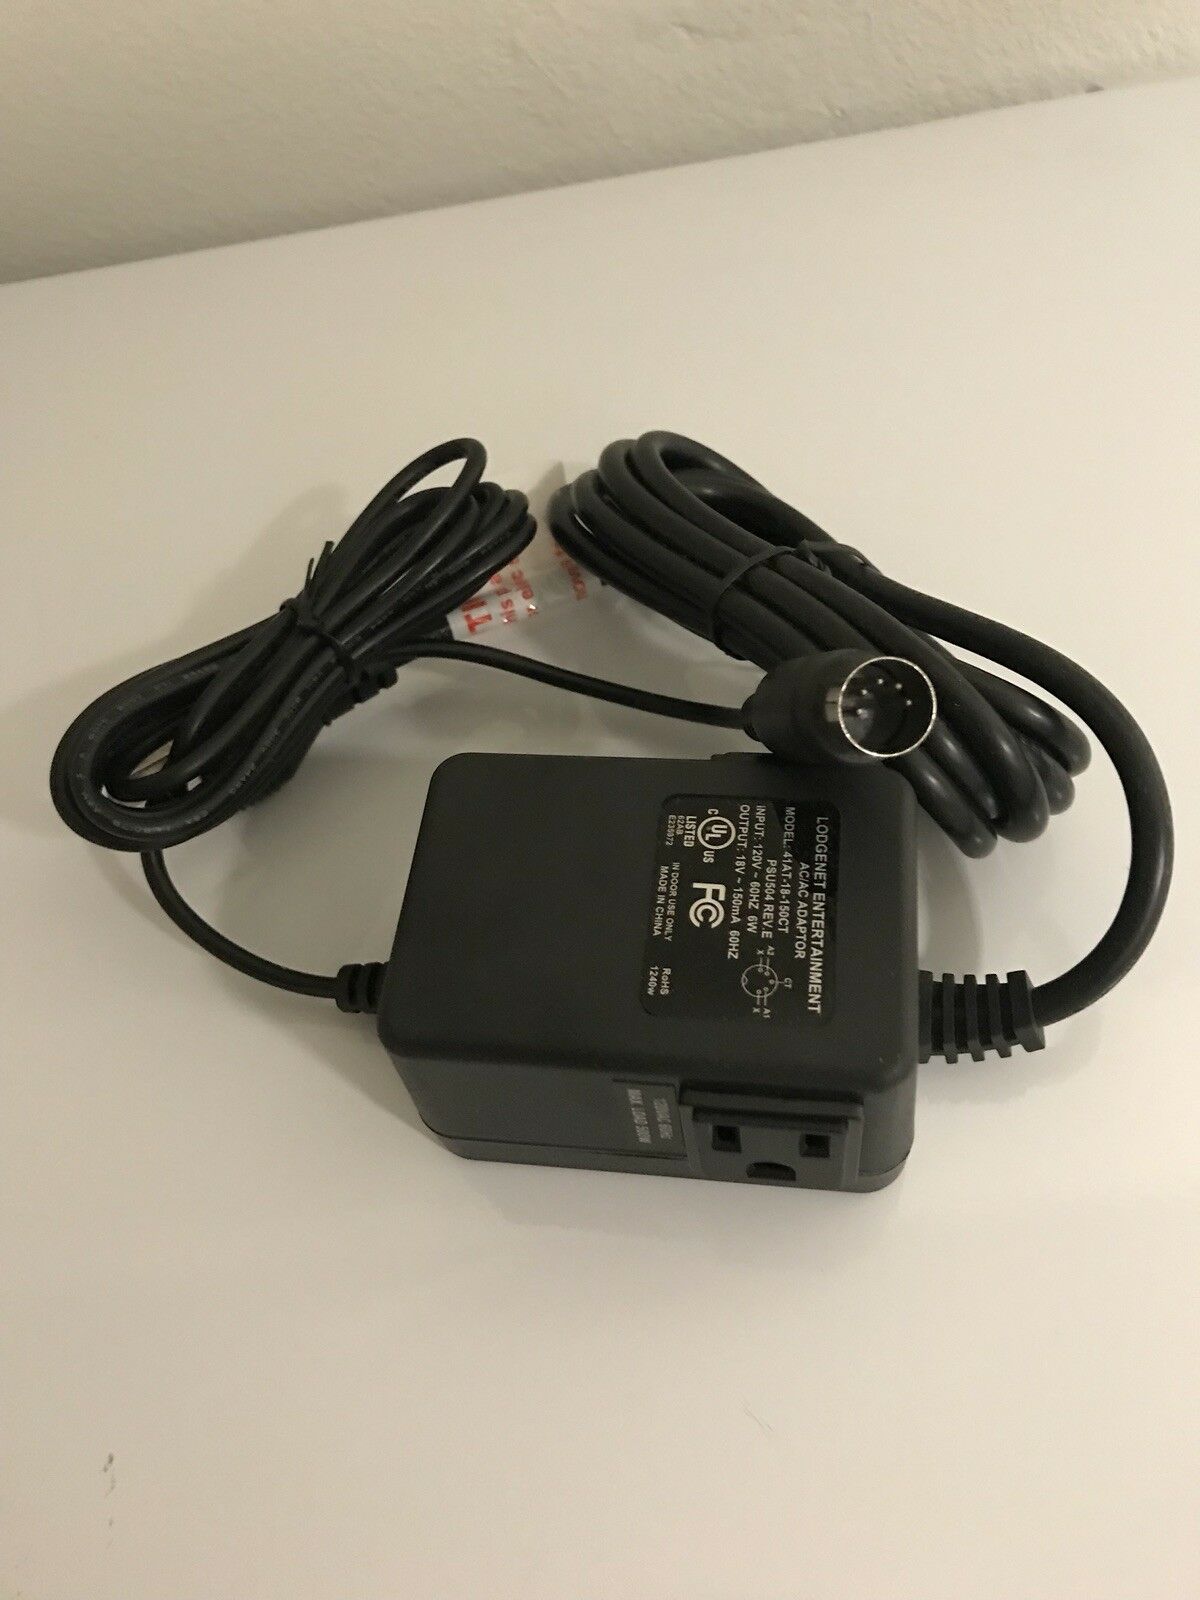 Lodgenet PSU504 AC Adapter Power Cord Supply Charger Cable Wire